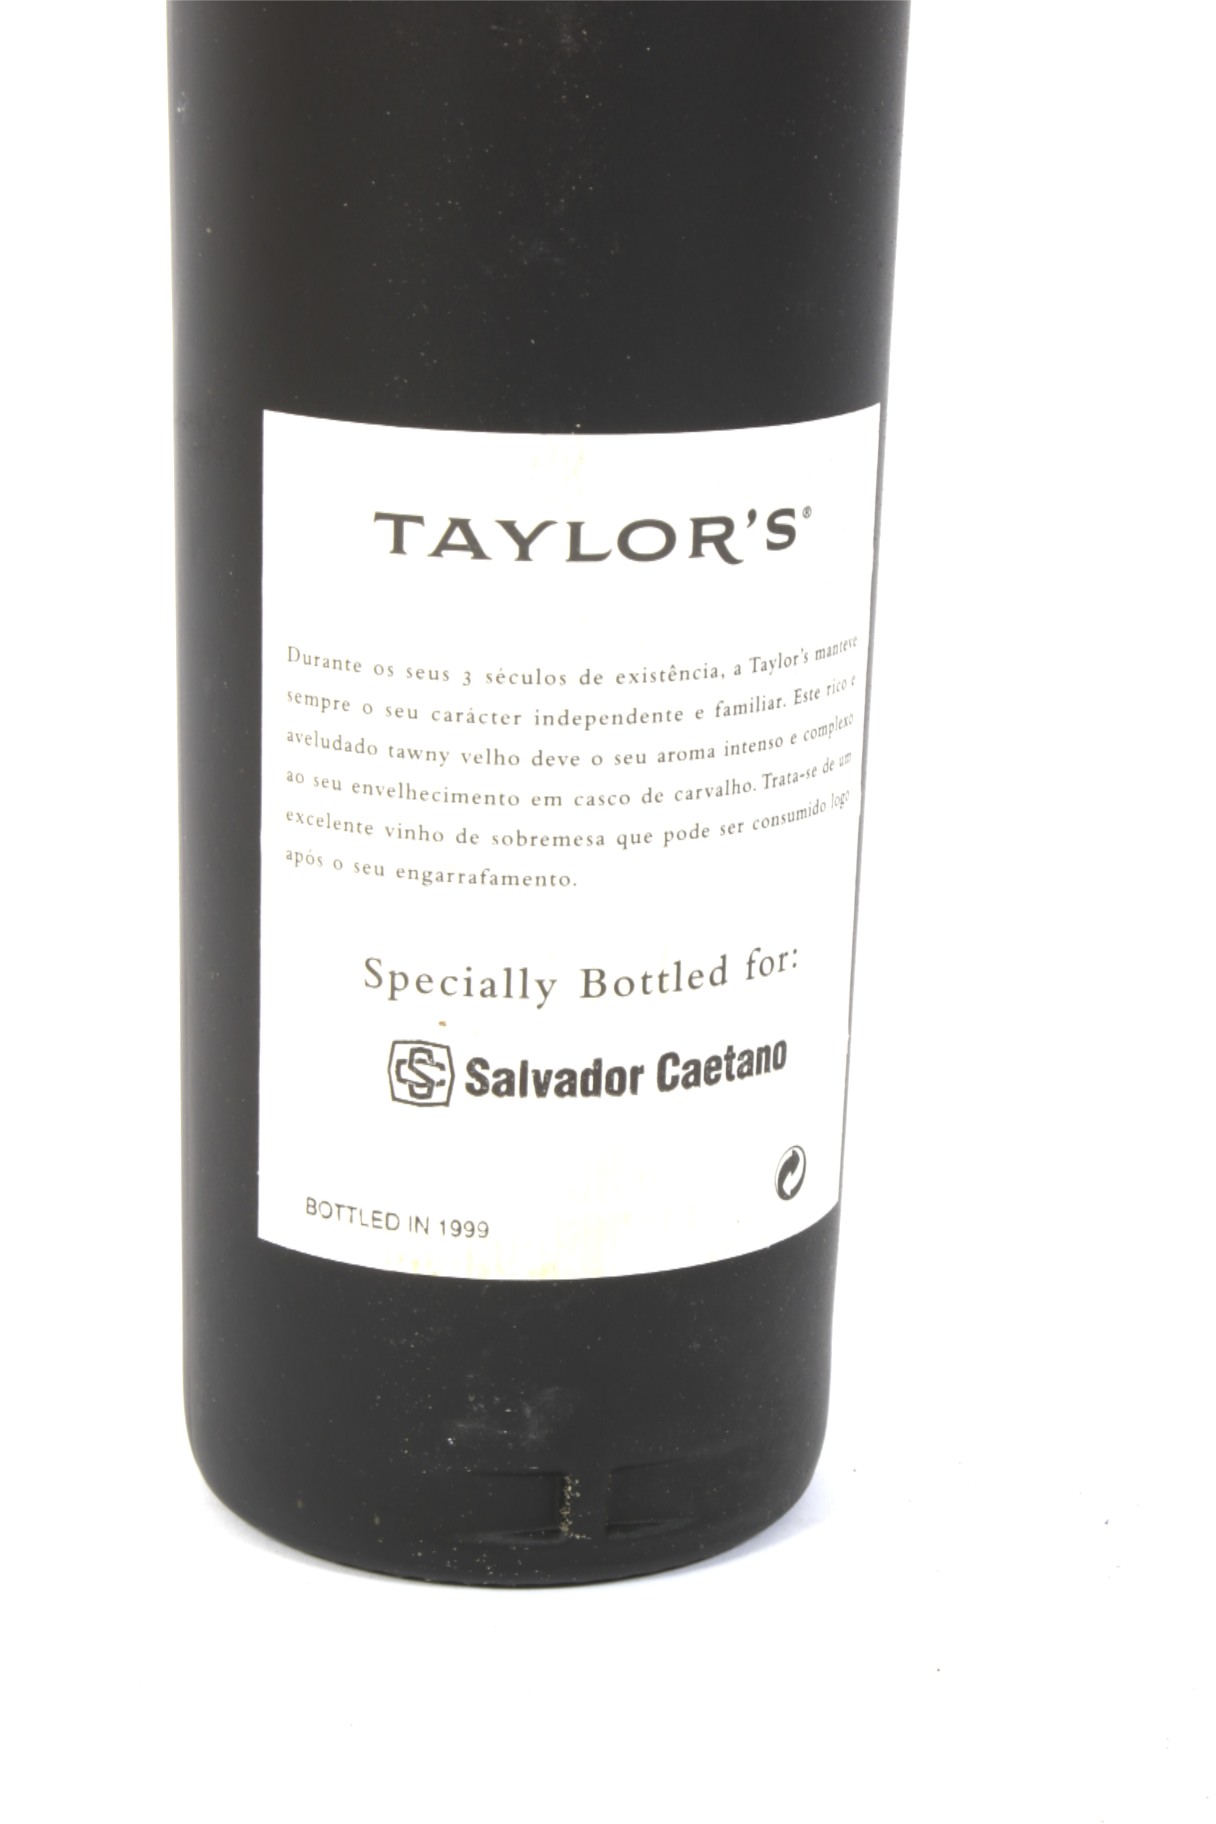 A bottle of Taylor's 10 year old tawny port. - Image 3 of 3